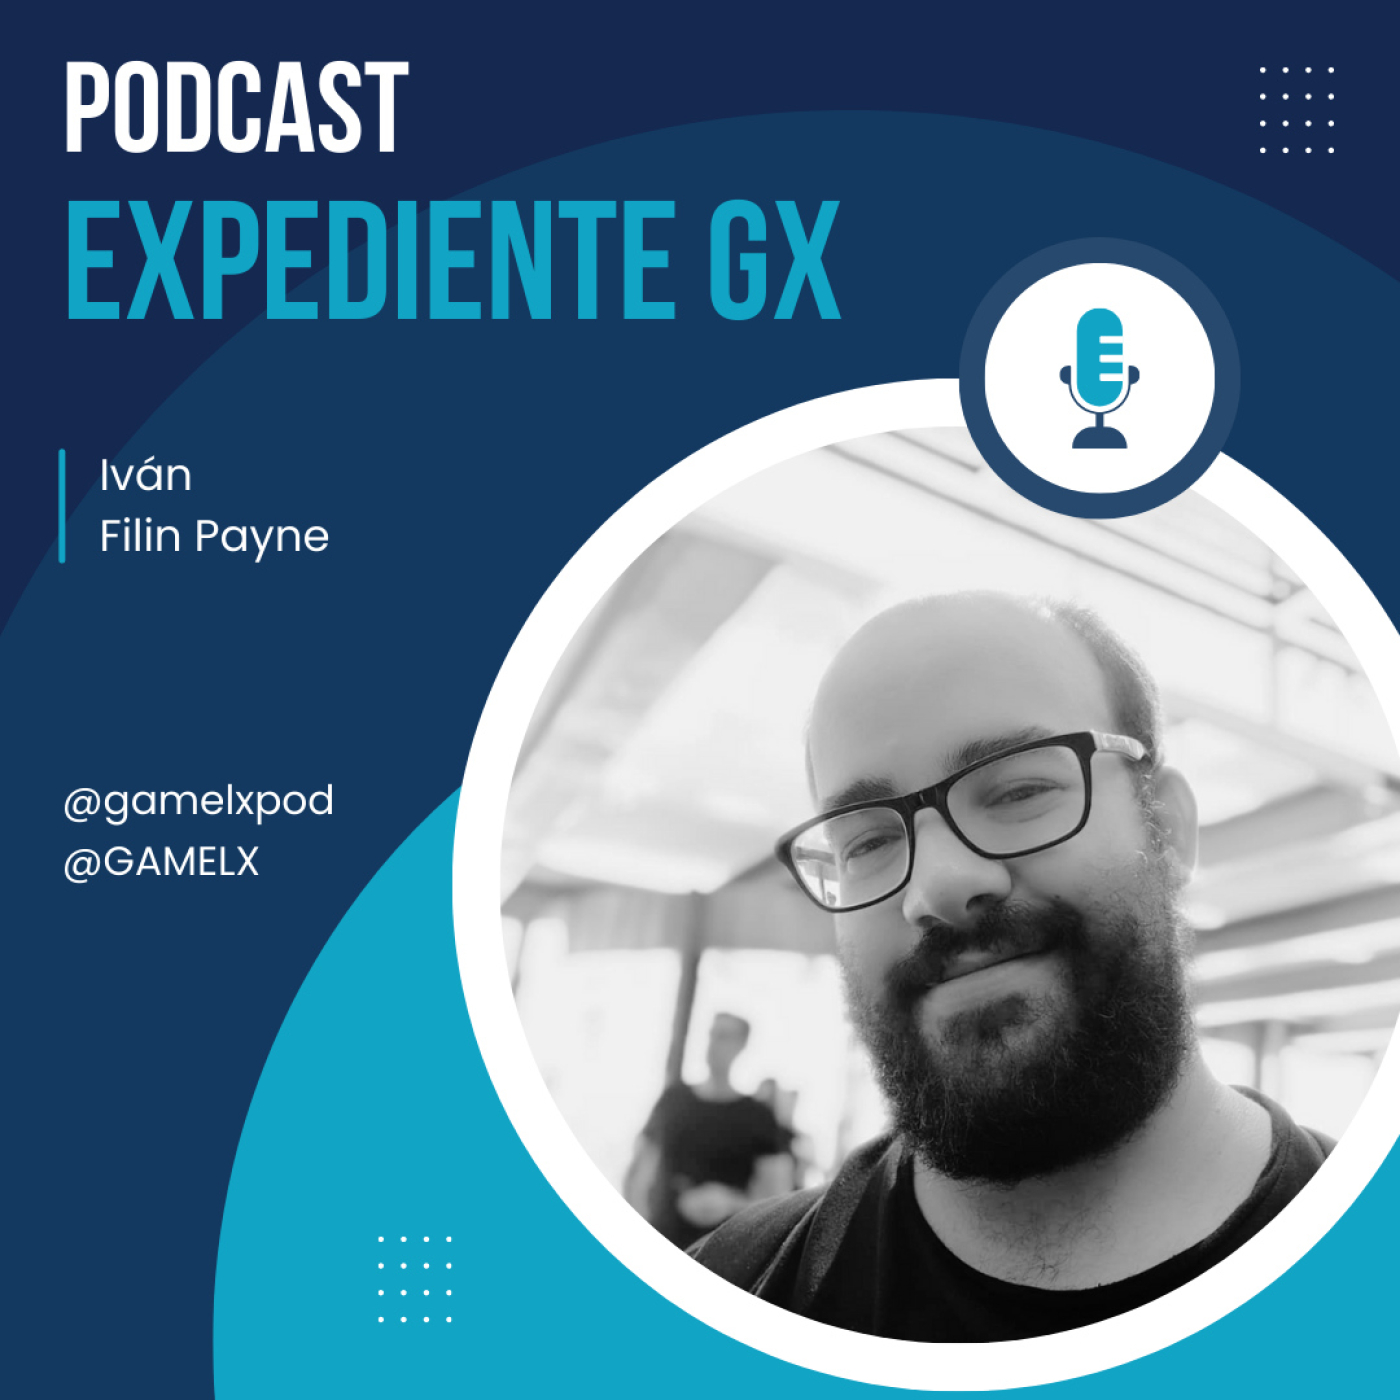 Expediente GX: Iván ”Filin Payne” | Videojuegos japoneses | PC Gaming | First Person Shooters